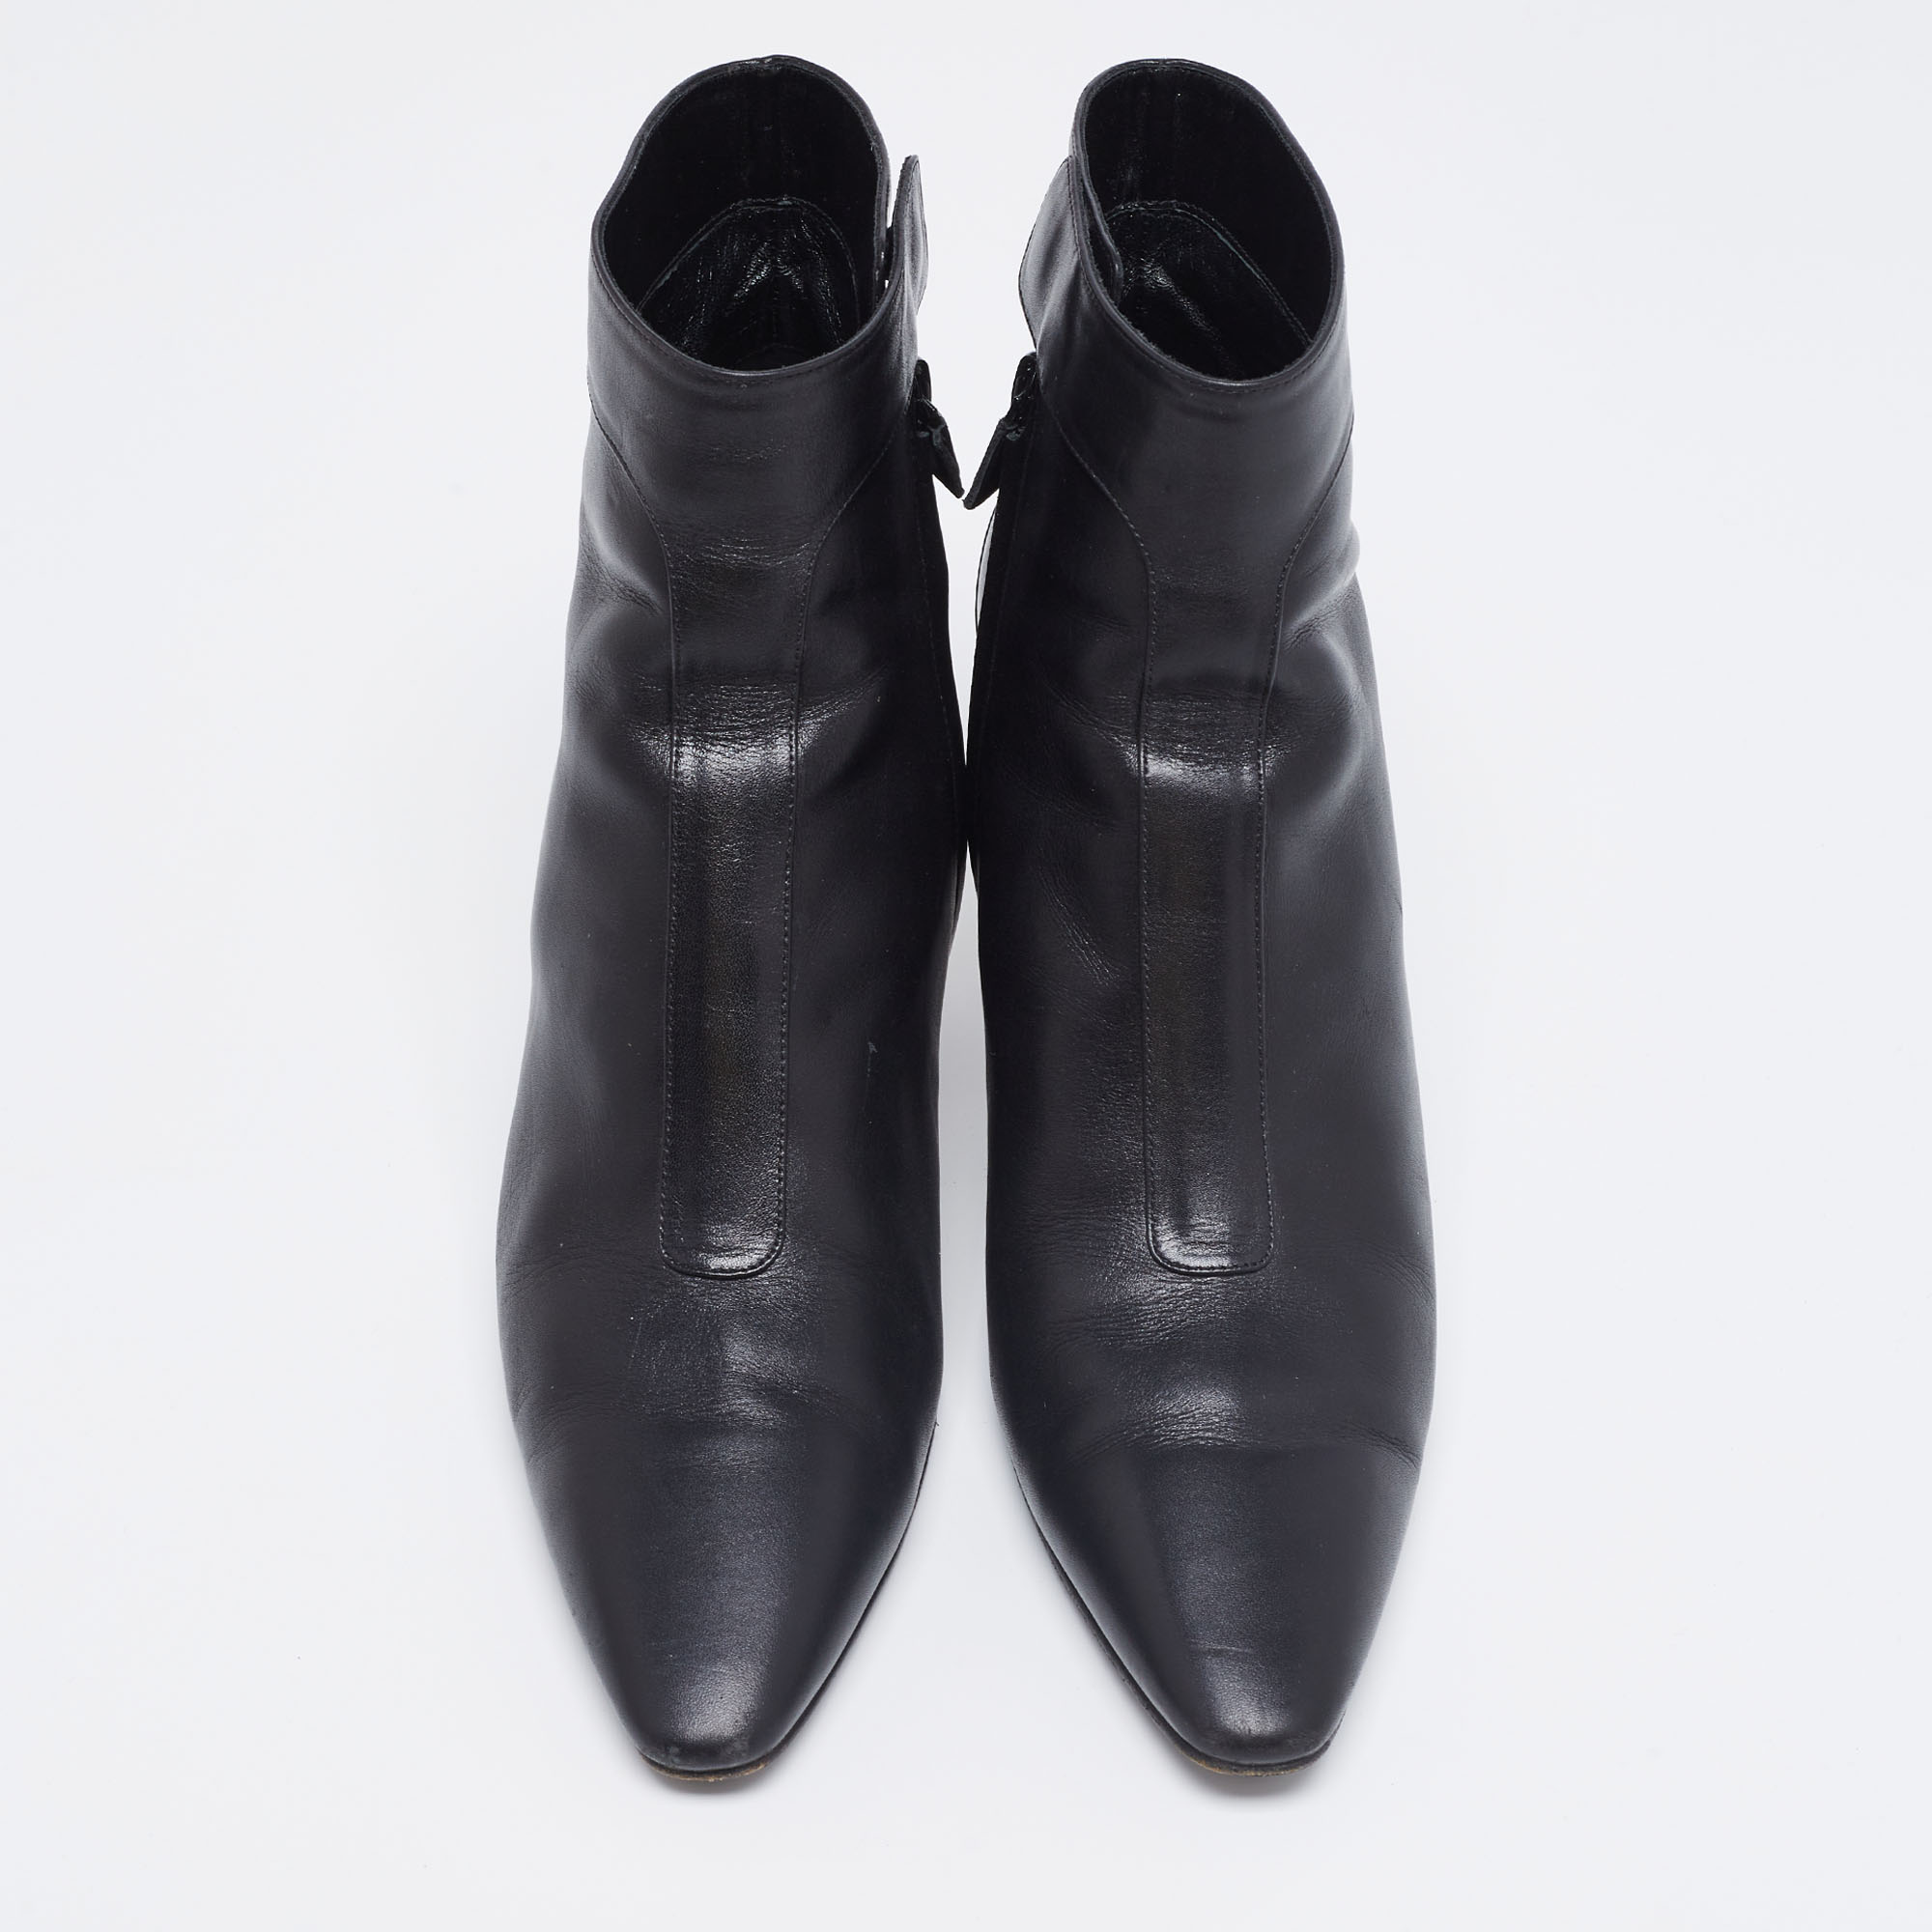 Roger Vivier Black Leather Ankle Booties Size 38